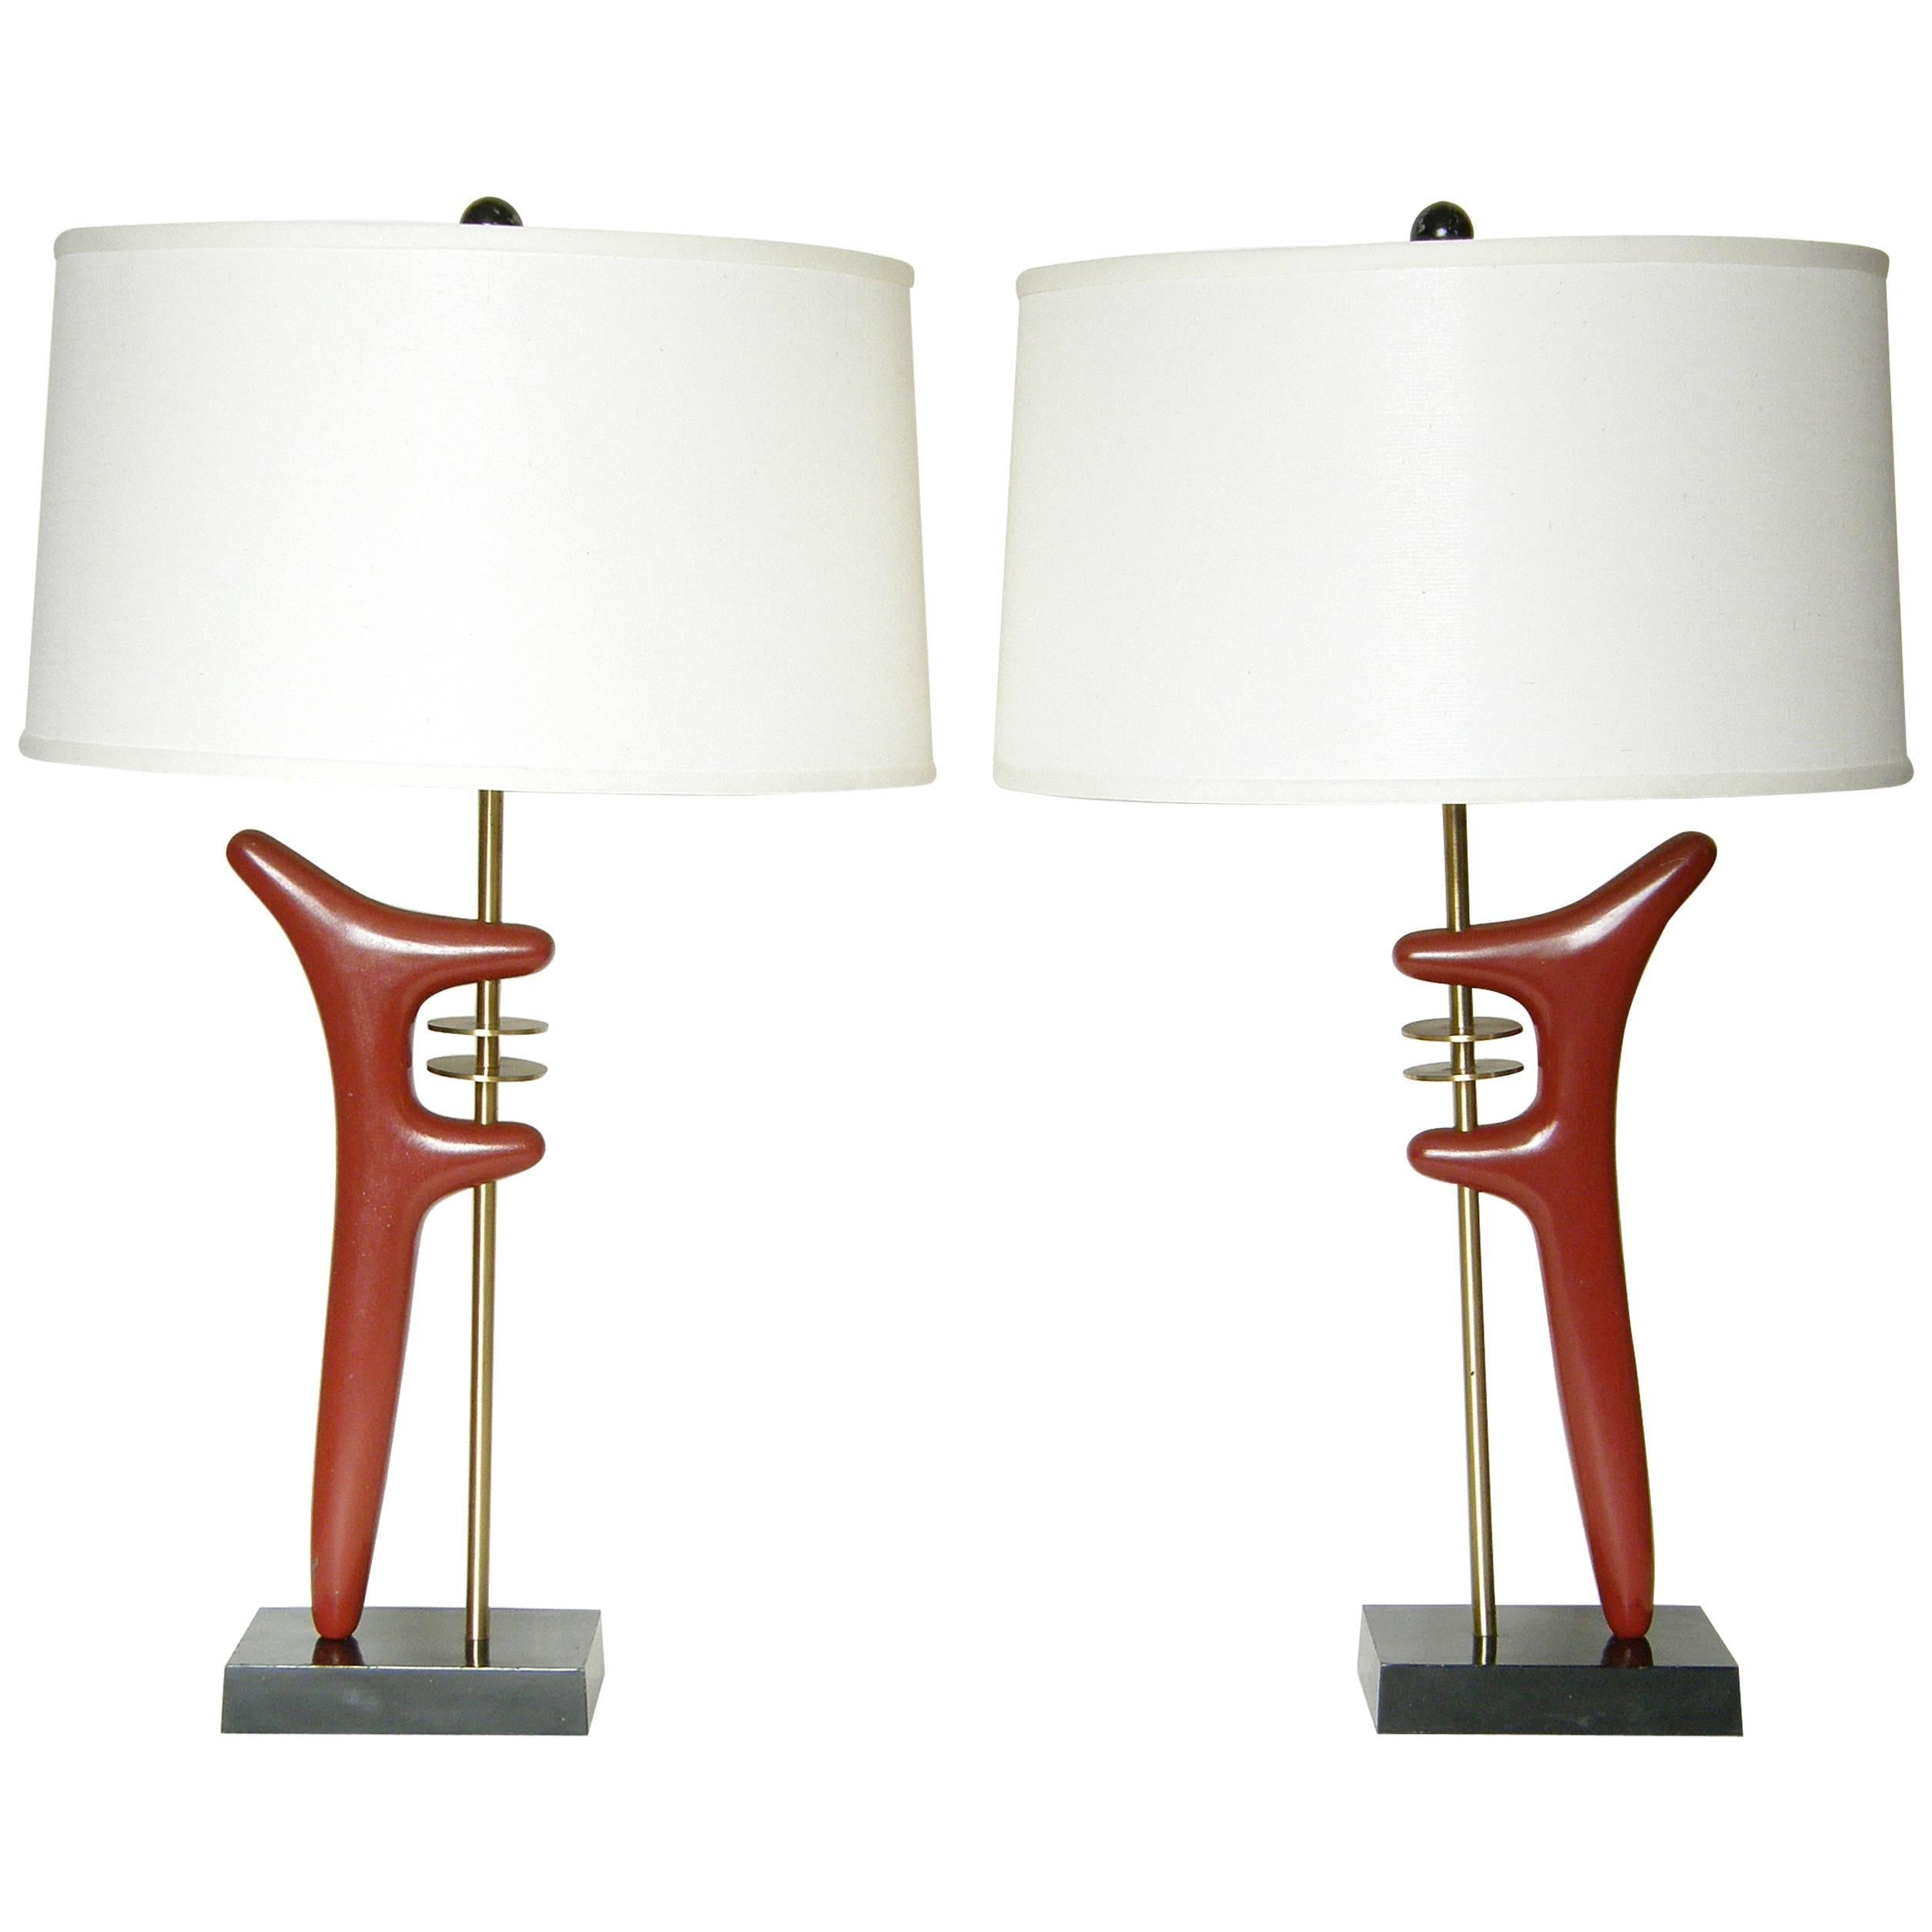 Pair of Sculptural Brass and Enameled Metal Table Lamps